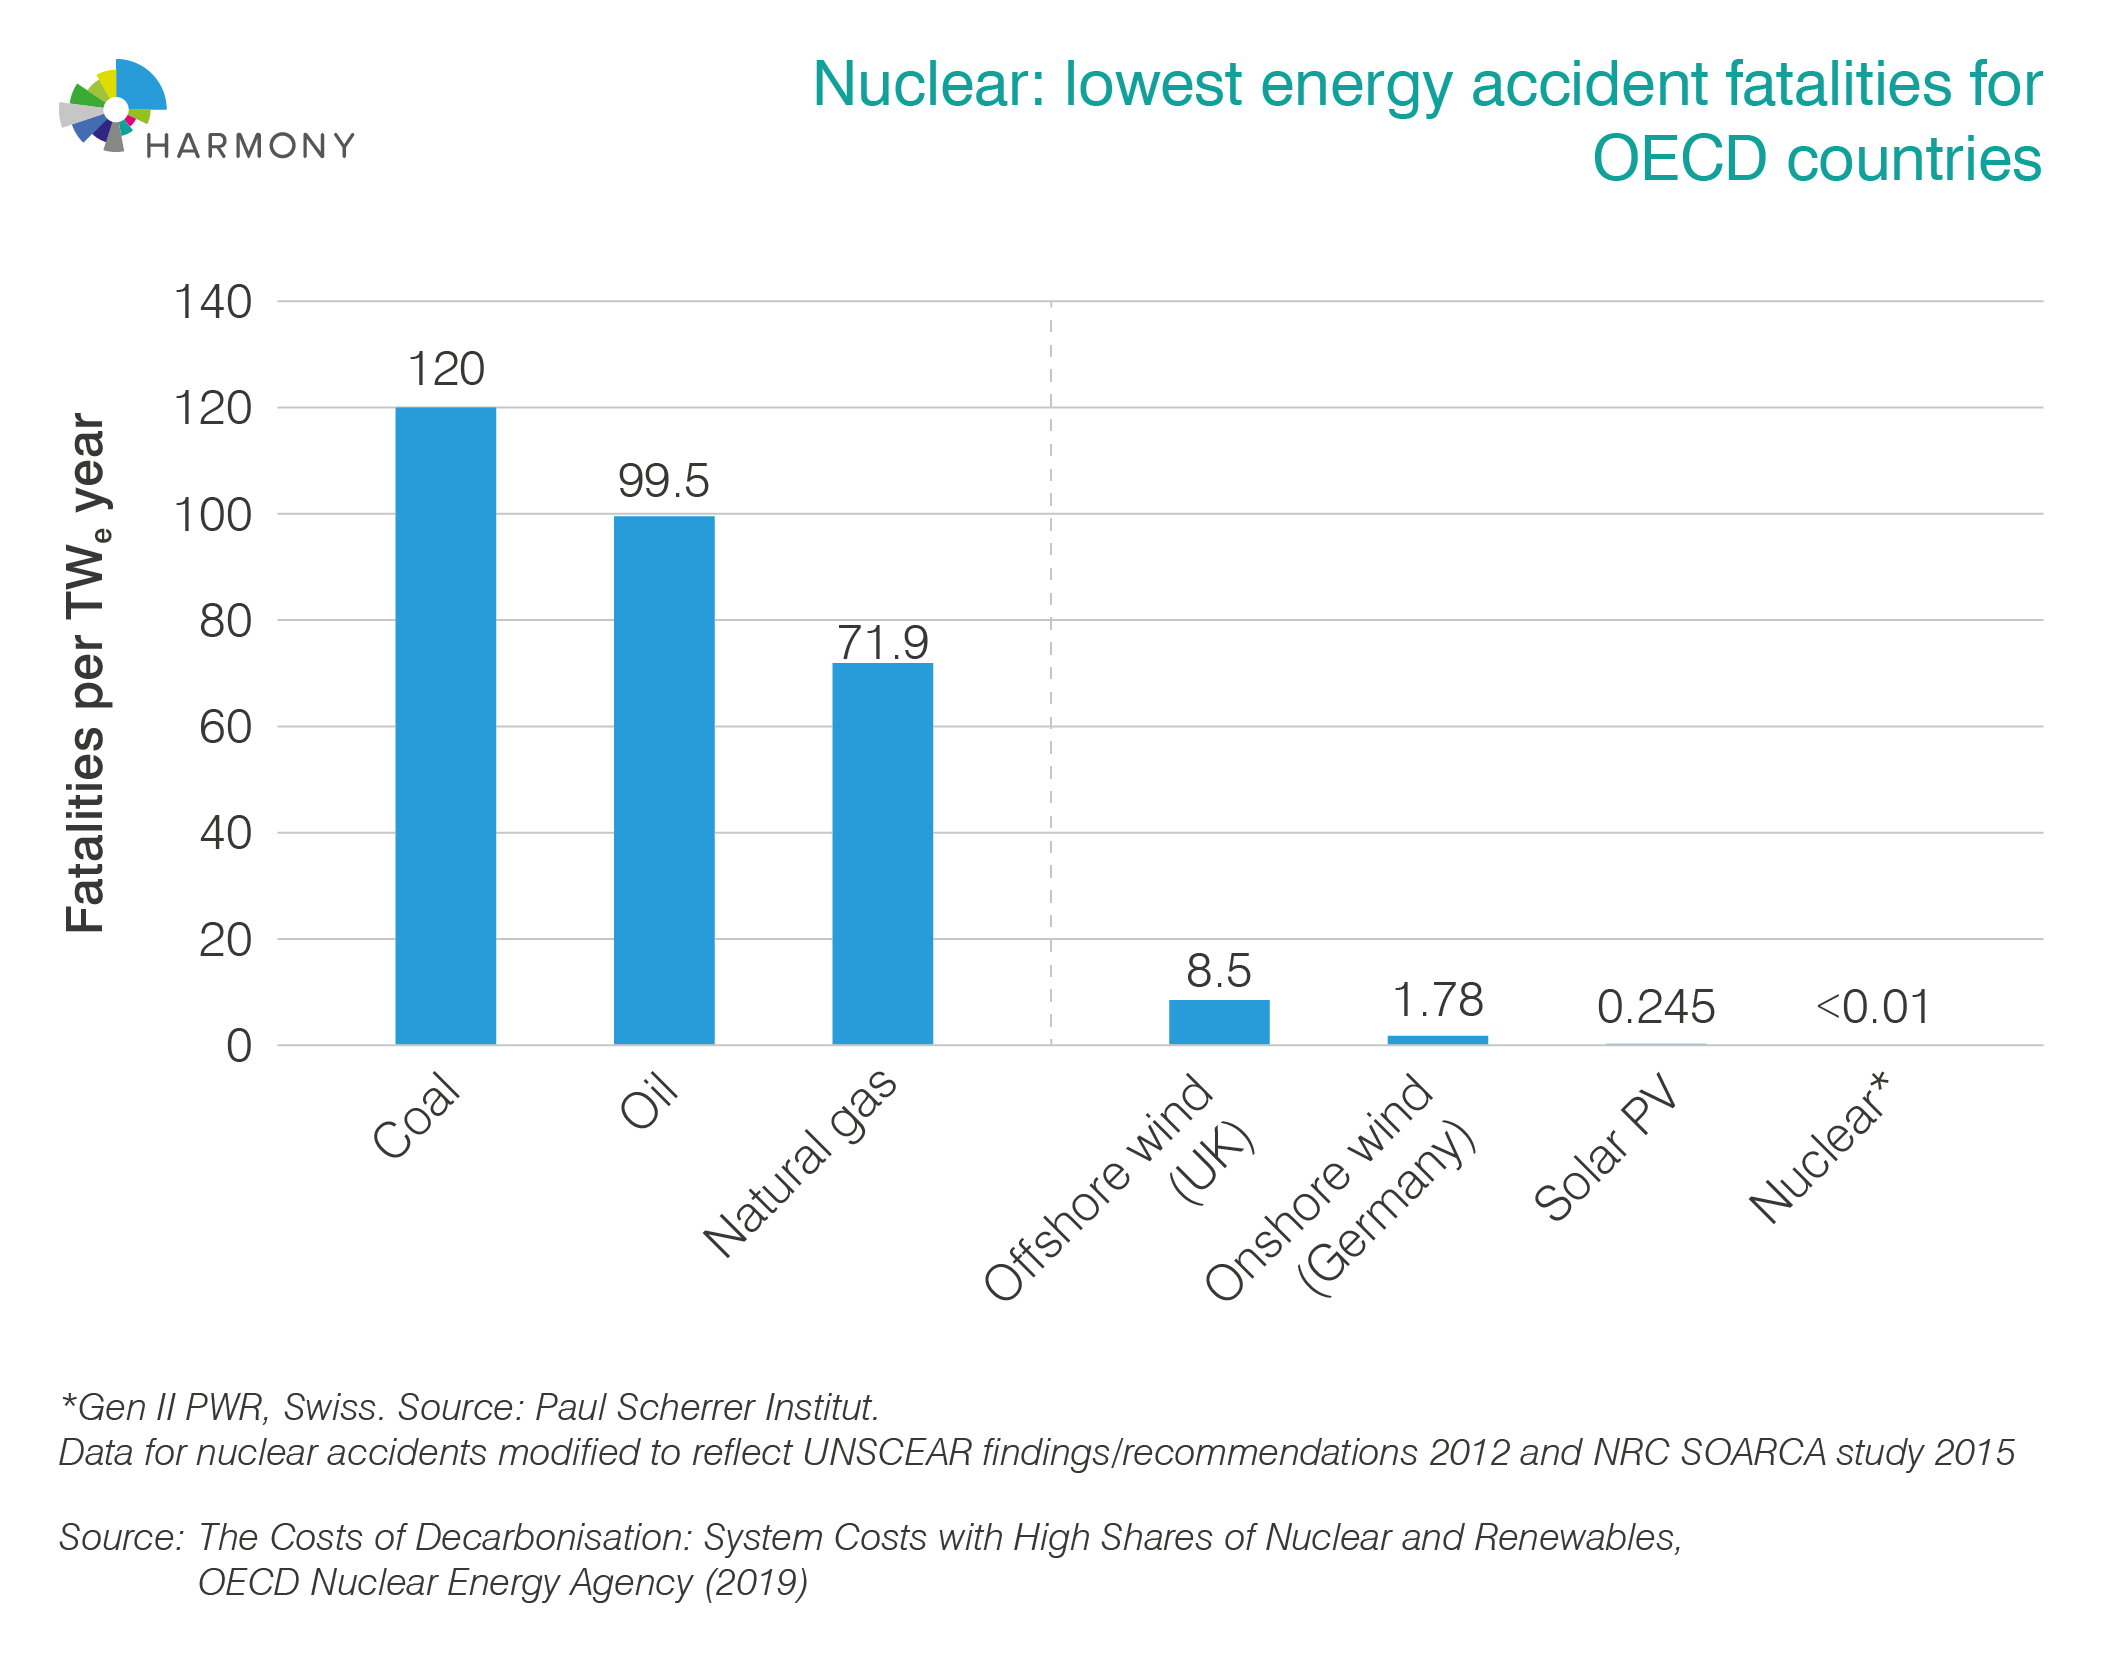 Energy accident fatalities for OECD countries